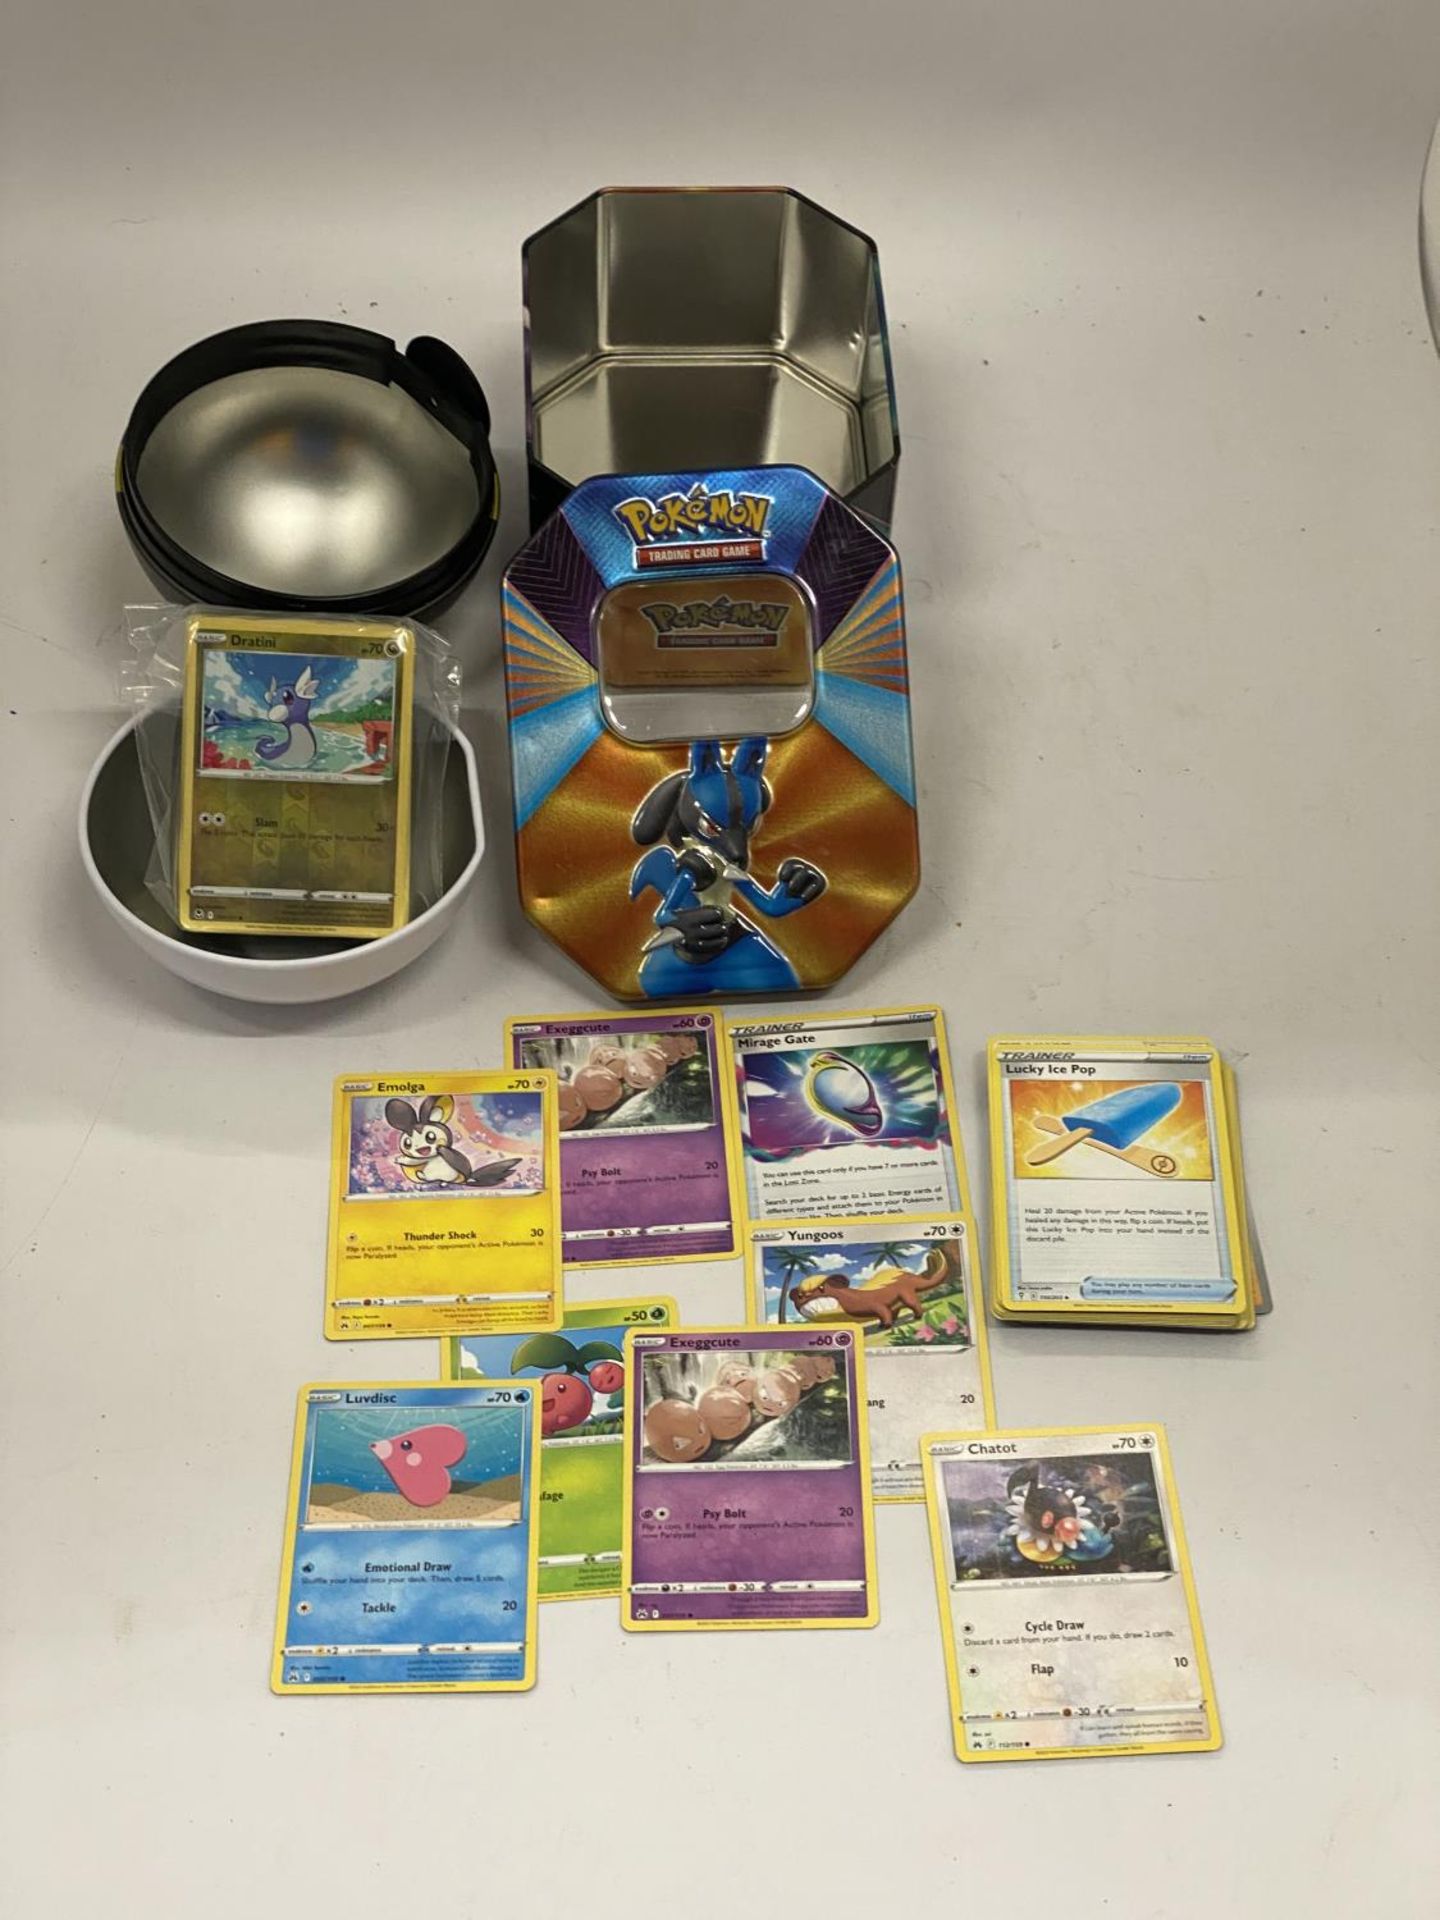 TWO POKEMON COLLECTORS TINS WITH 110+ POKEMON CARDS INCLUDING HOLOS - Image 2 of 3